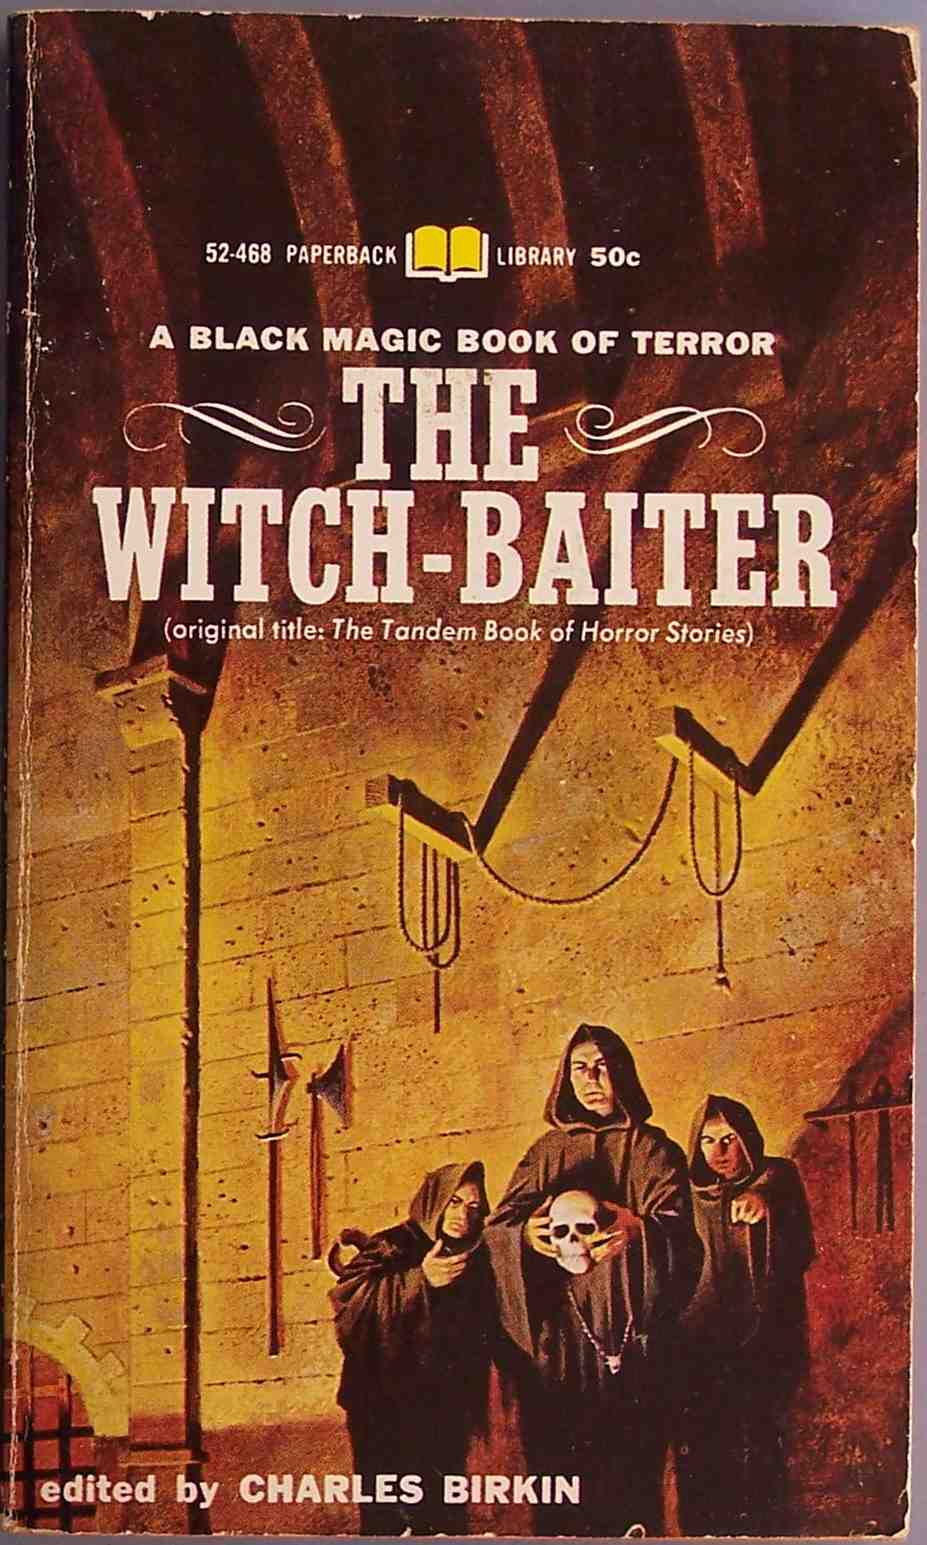 a book cover for the witch - batter, featuring three people holding a skull